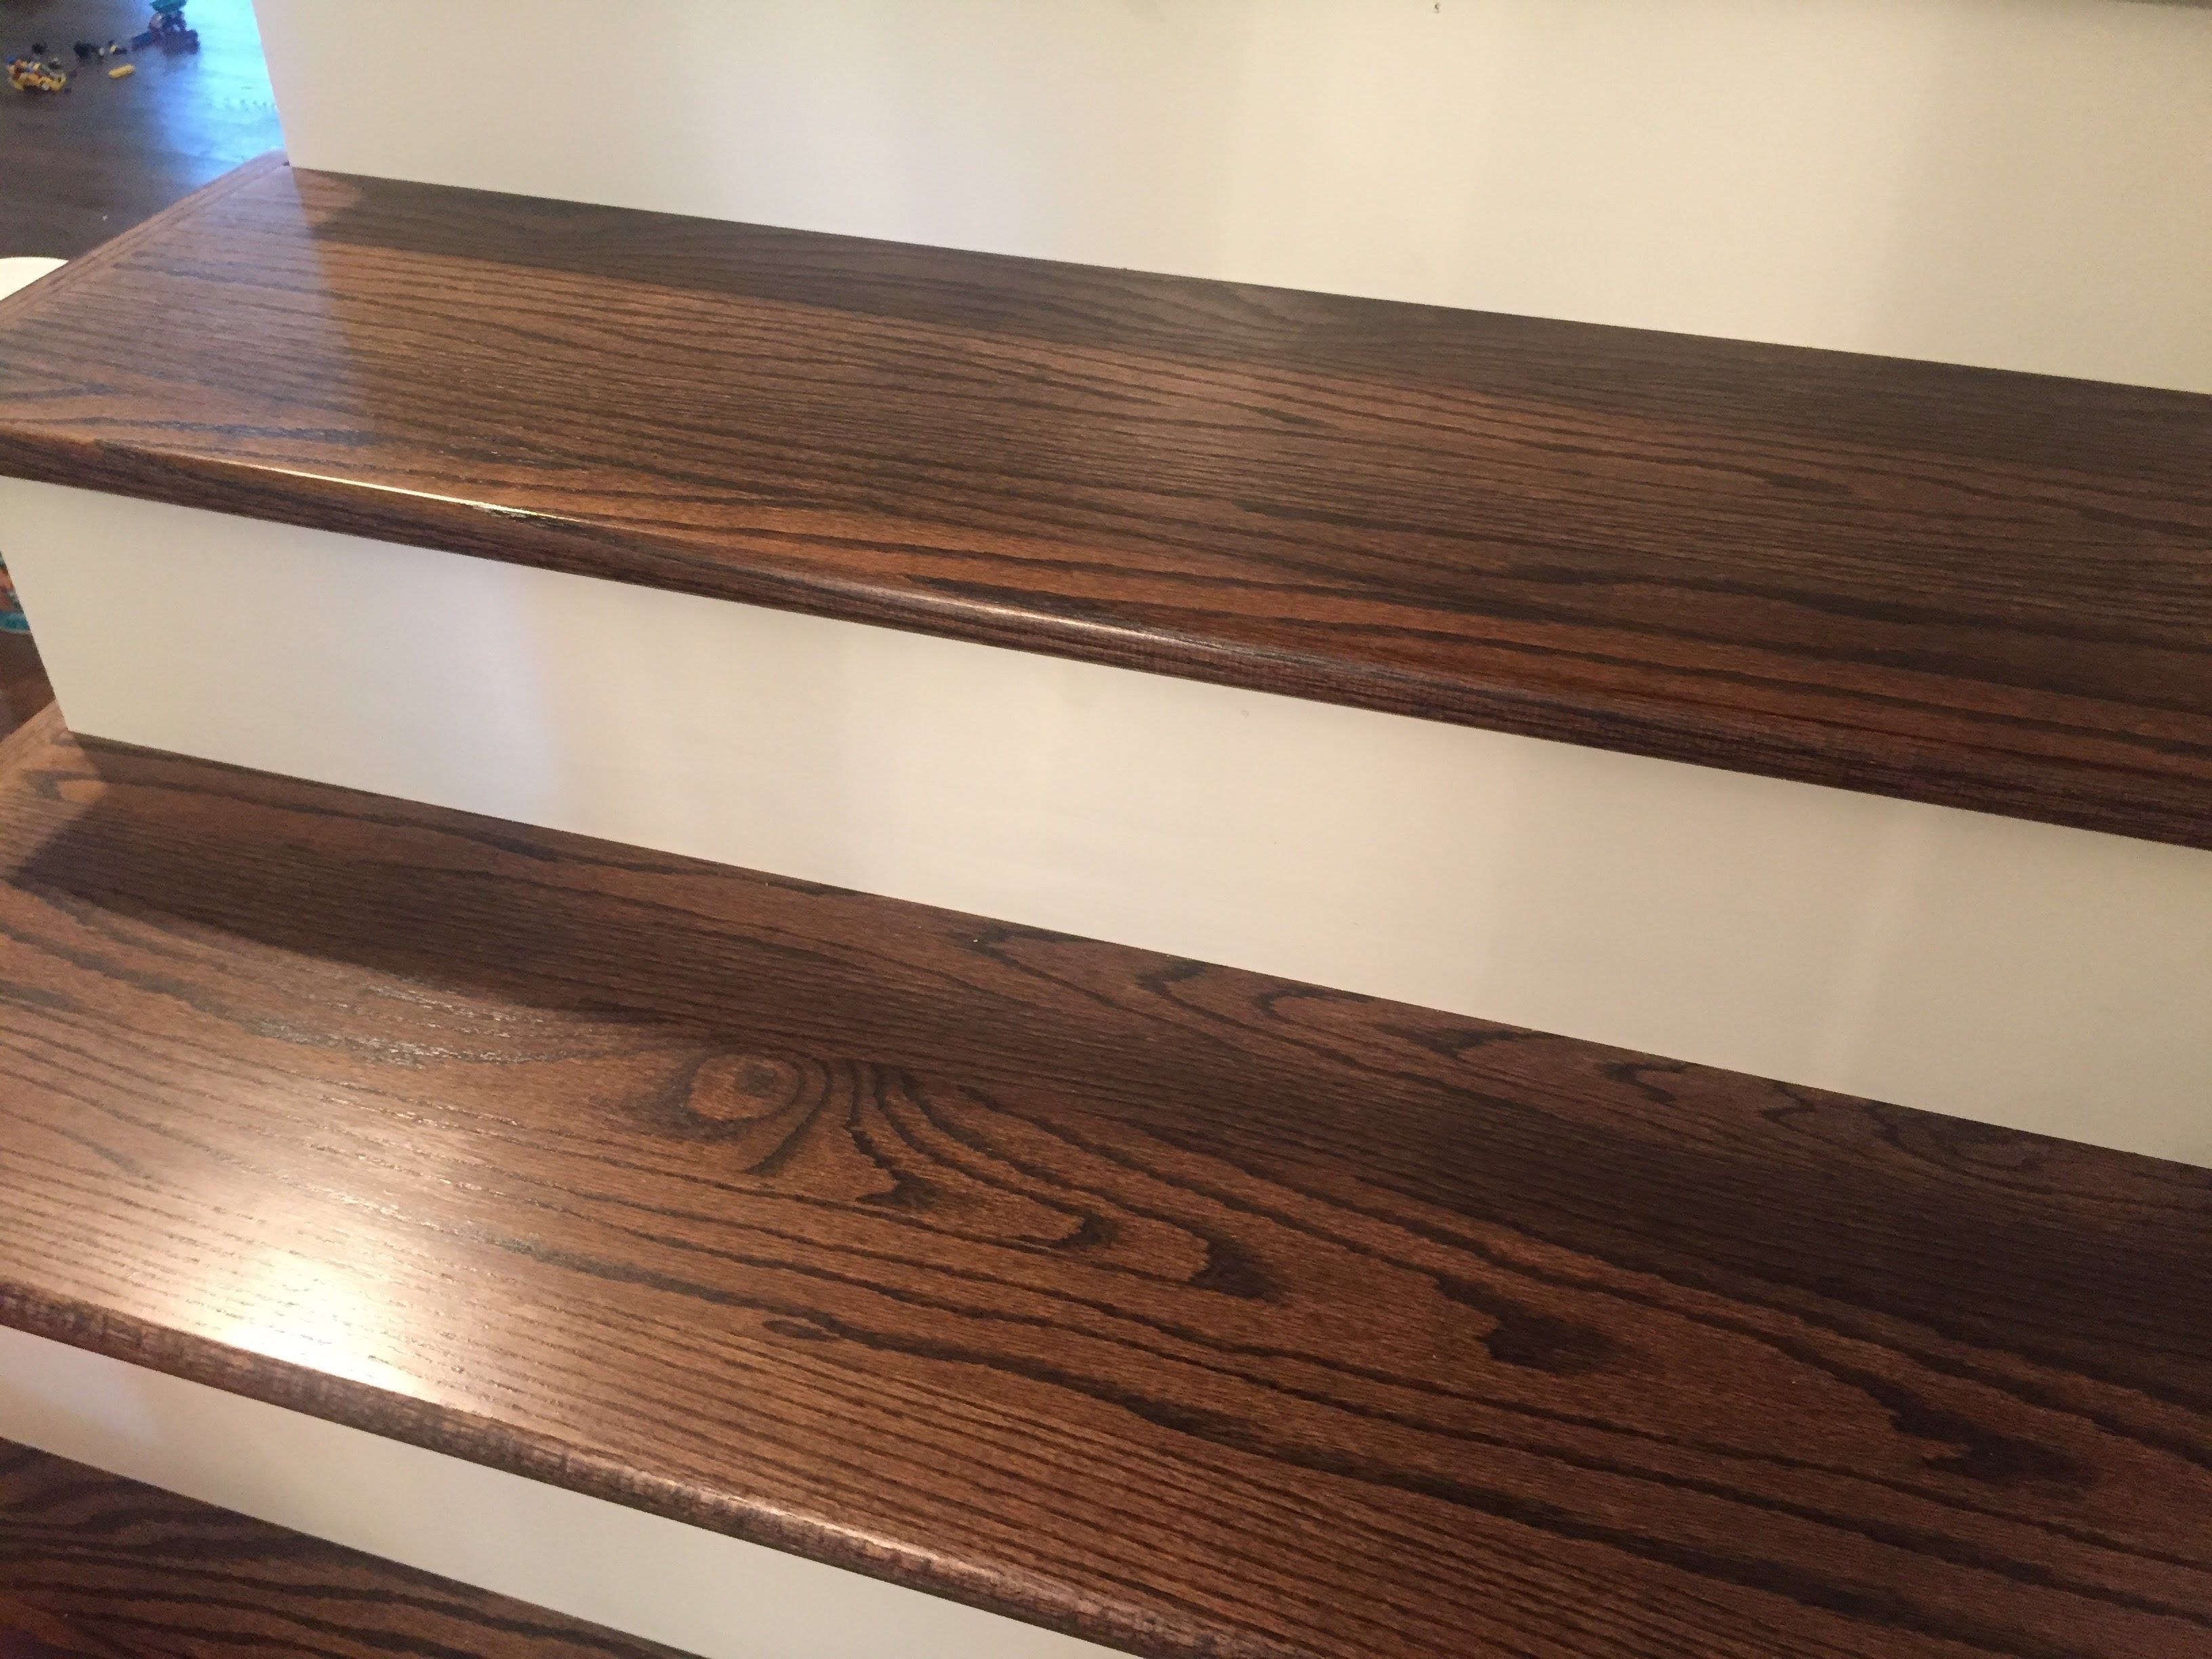 The Best Way To Install Creak Free Wood Stair Treads Without Nails Pertaining To Floor Treads (View 14 of 15)